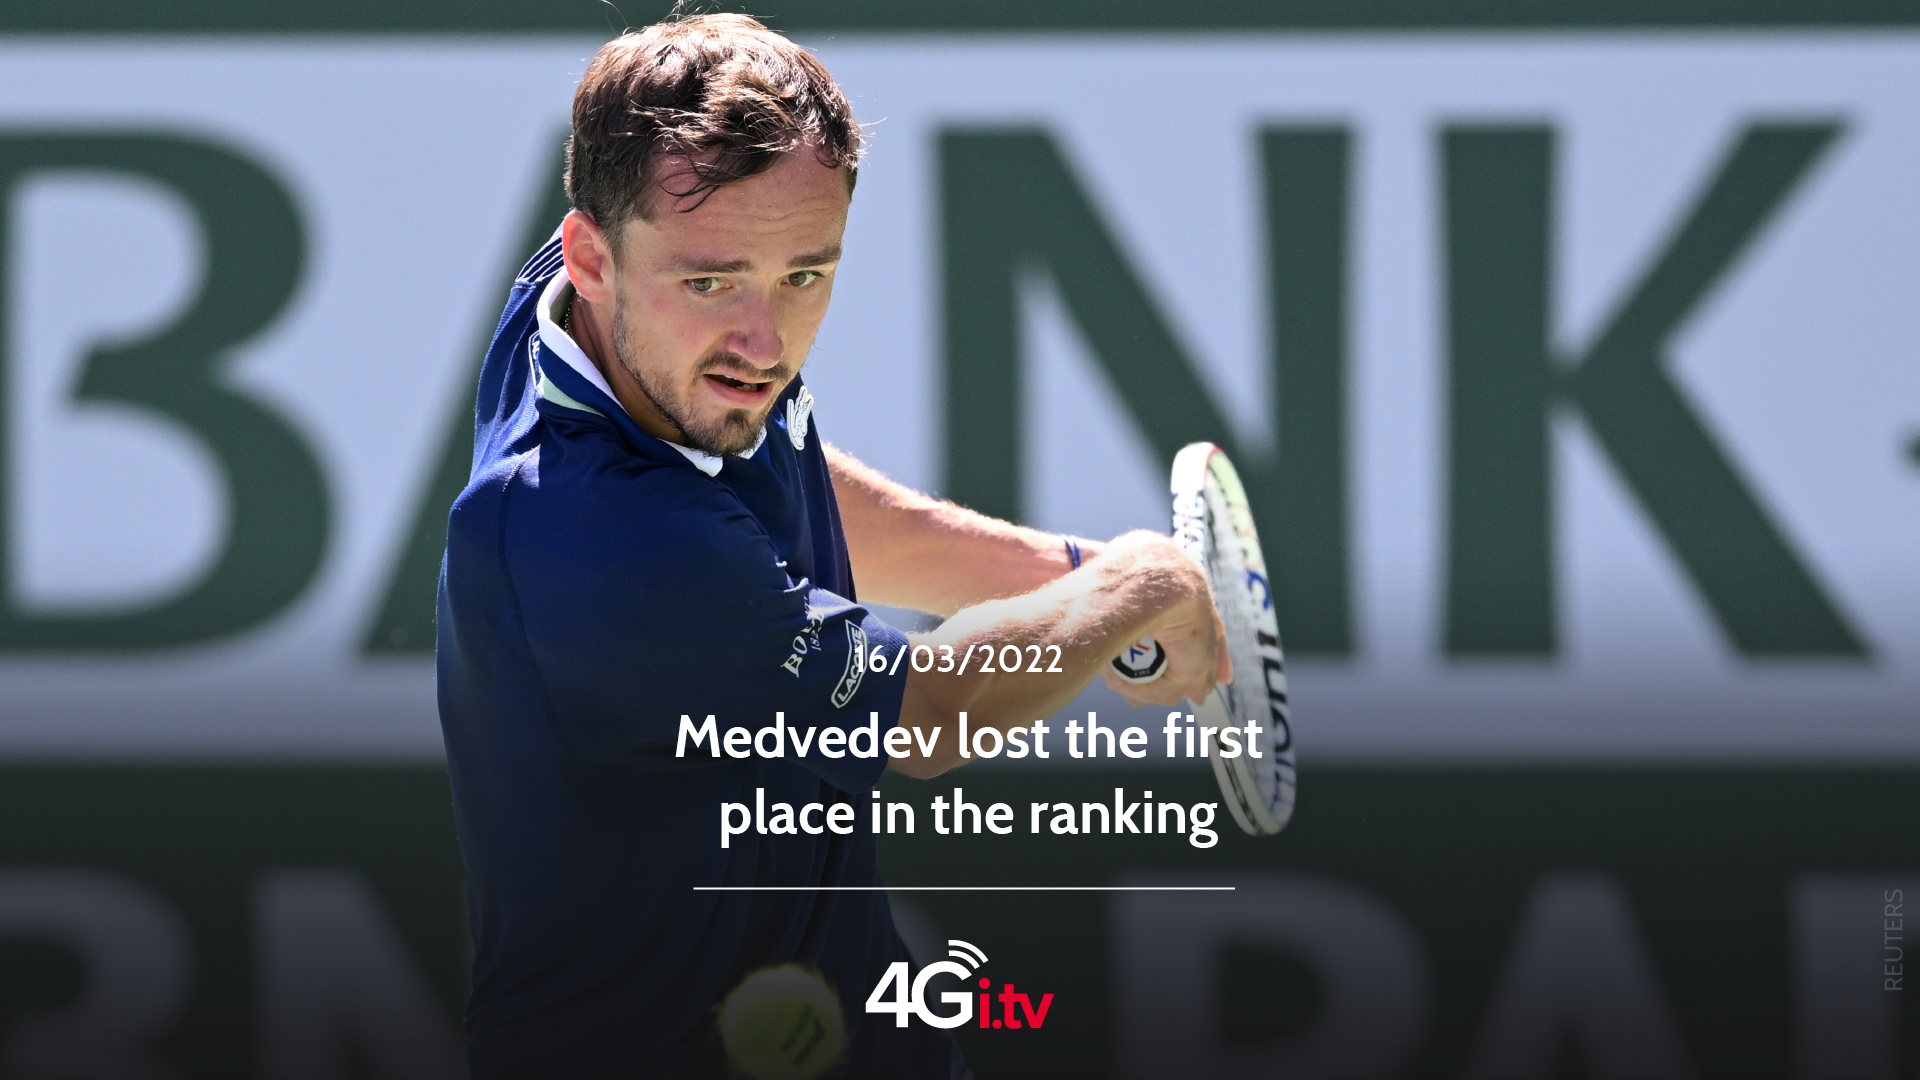 Подробнее о статье Medvedev lost the first place in the ranking